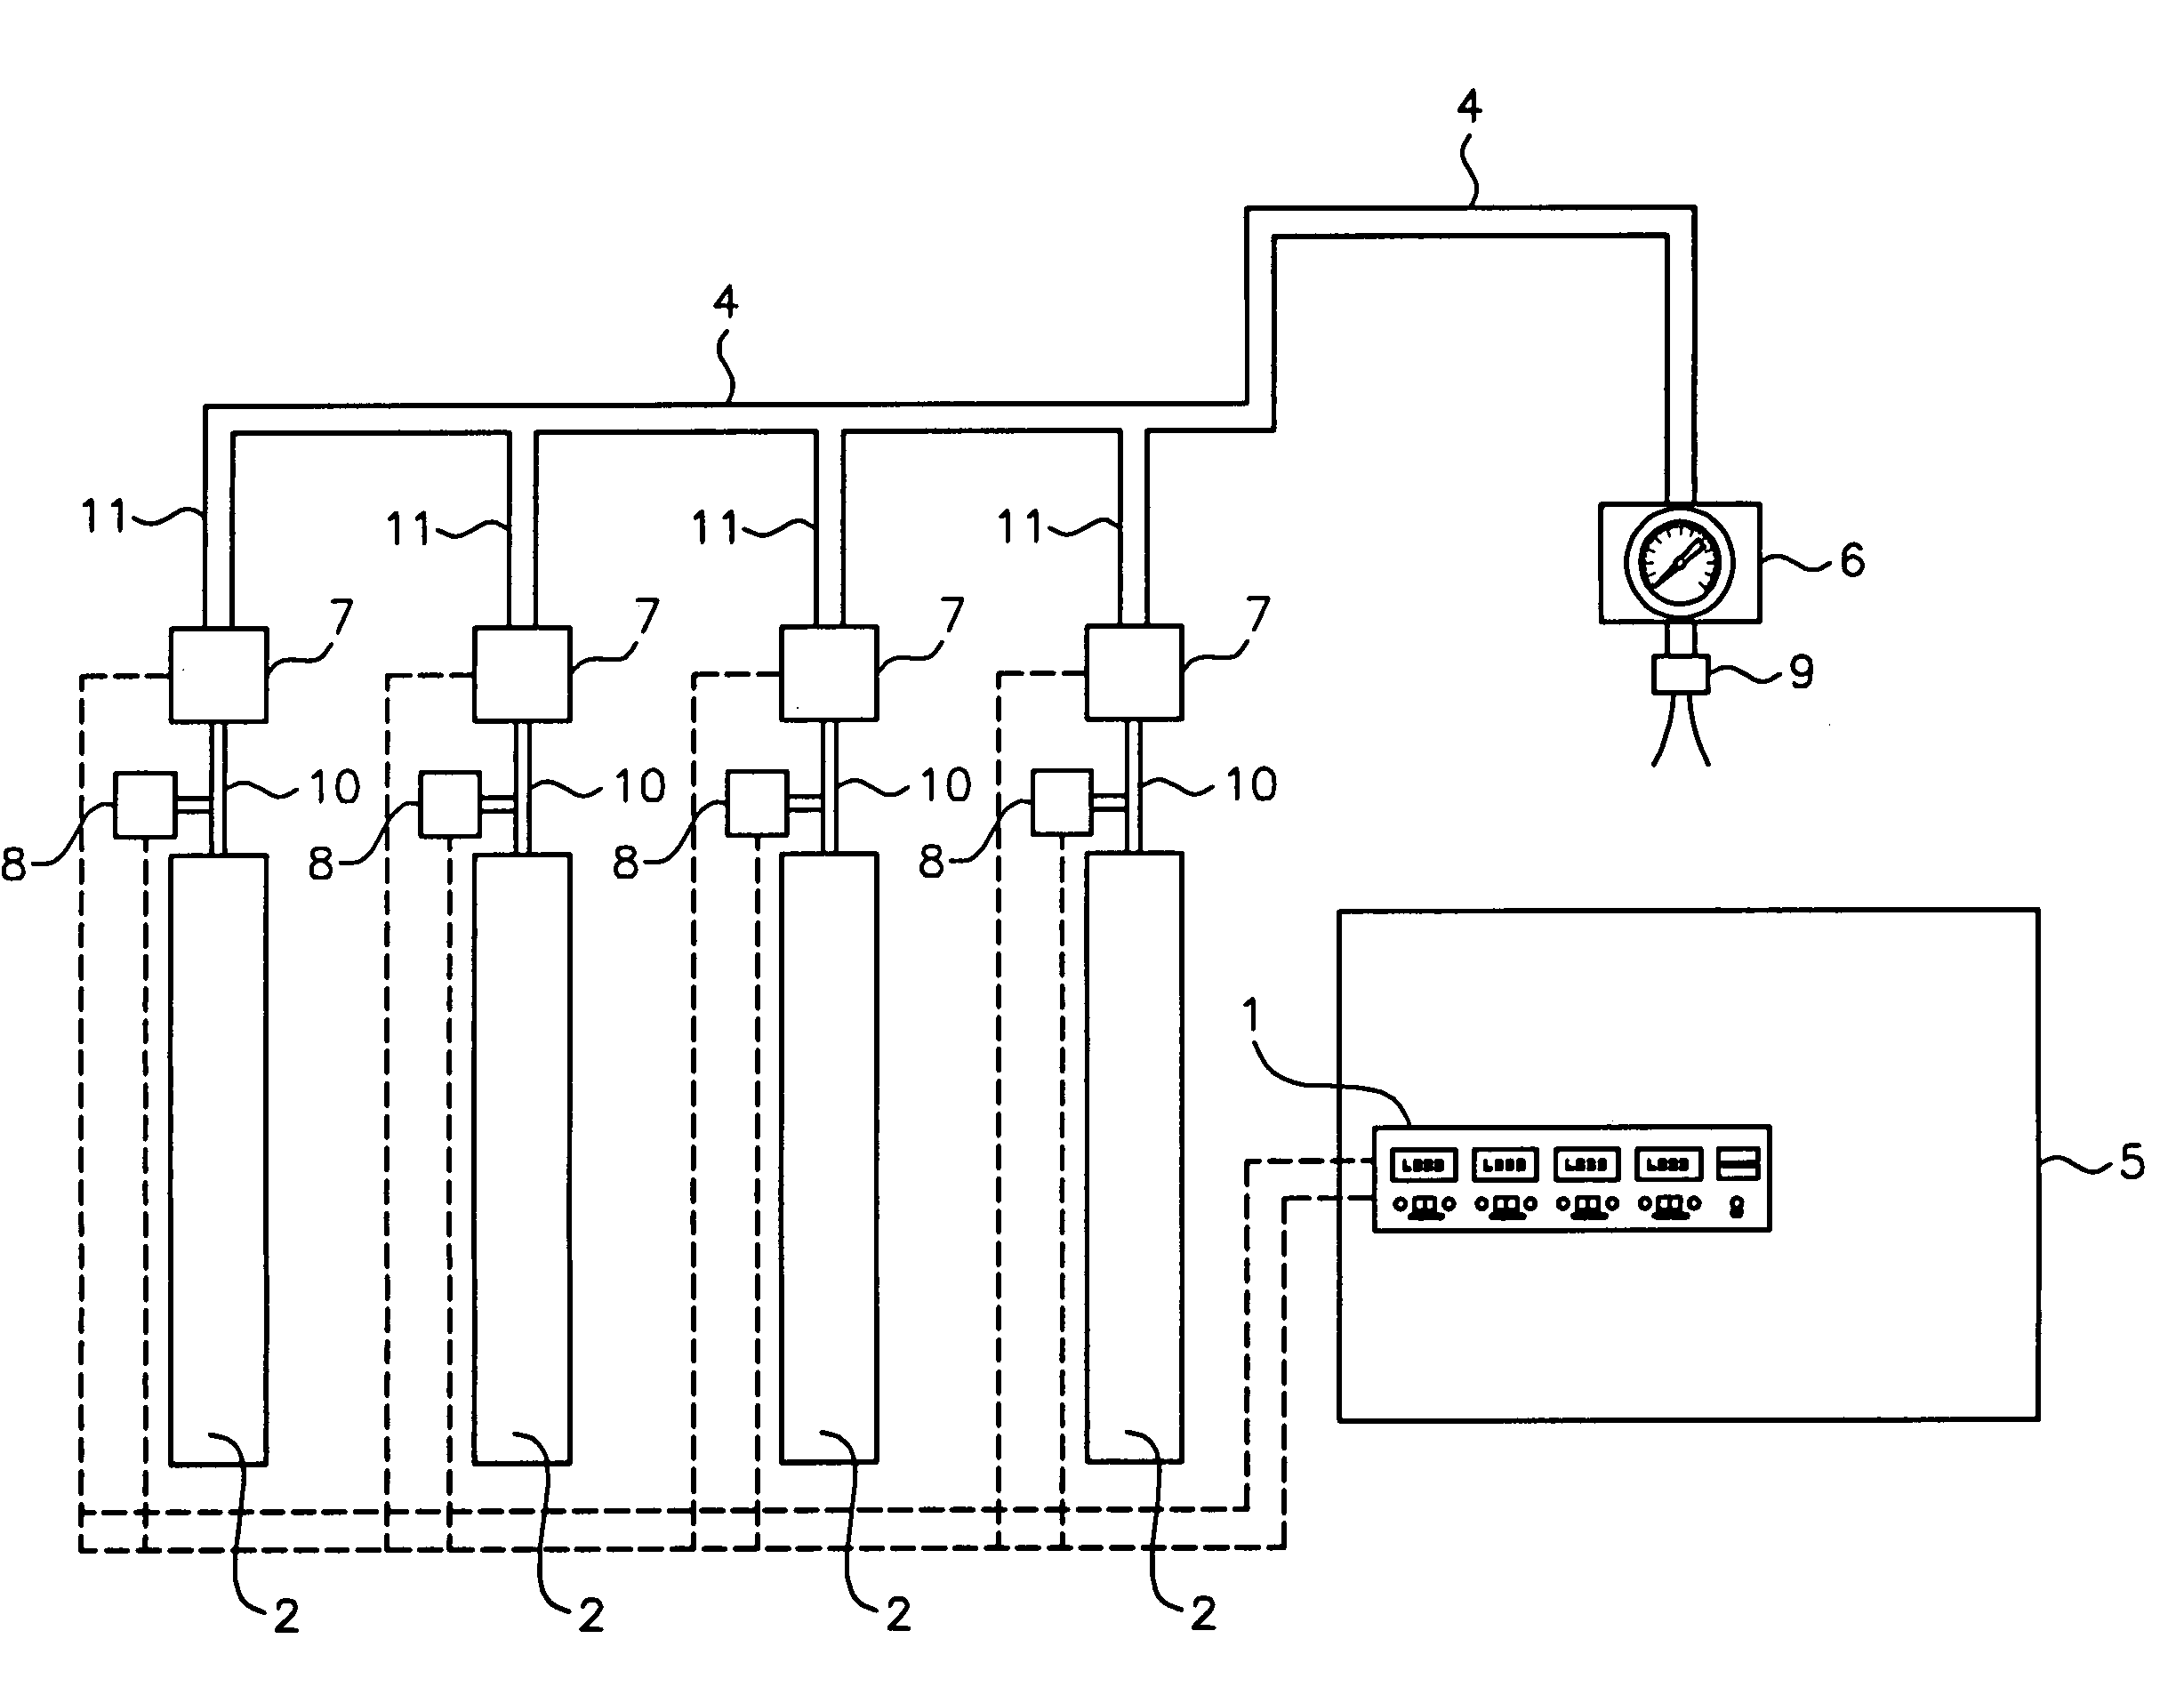 Vehicle mounted compressed air distribution system